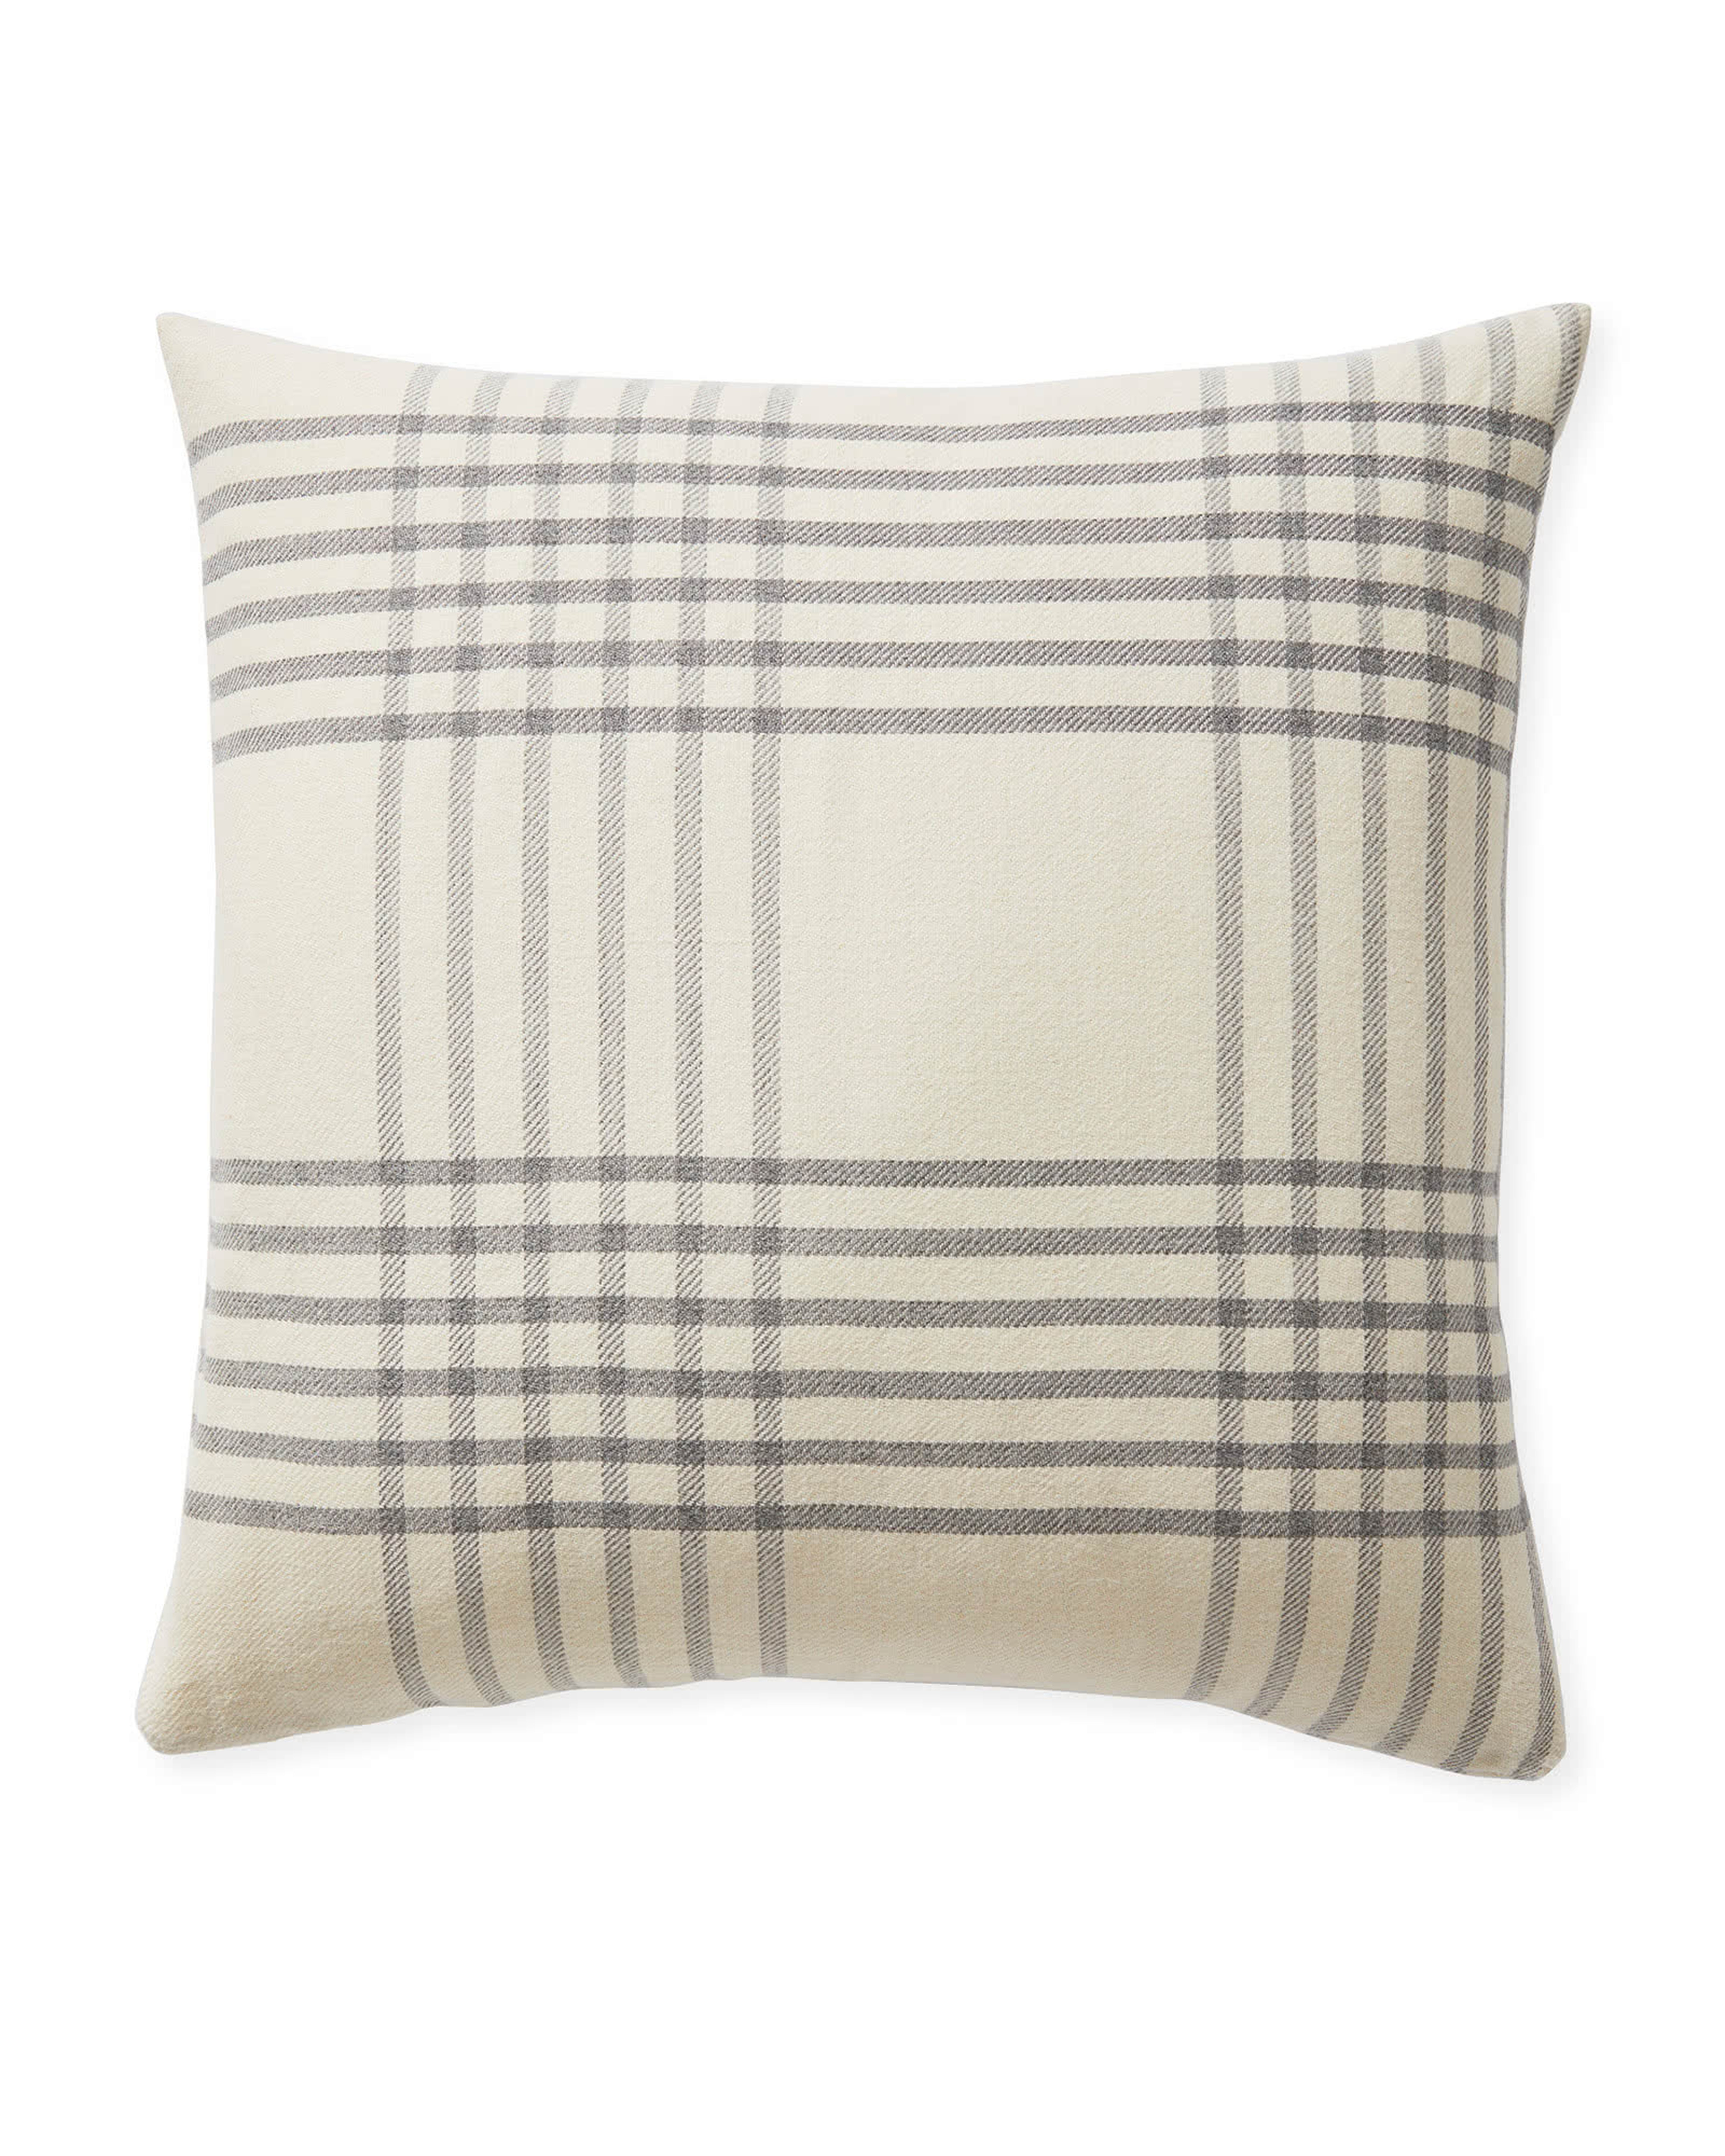 Blakely Plaid 24"SQ. Pillow Cover - Ivory/Grey - Insert sold separately - Serena and Lily